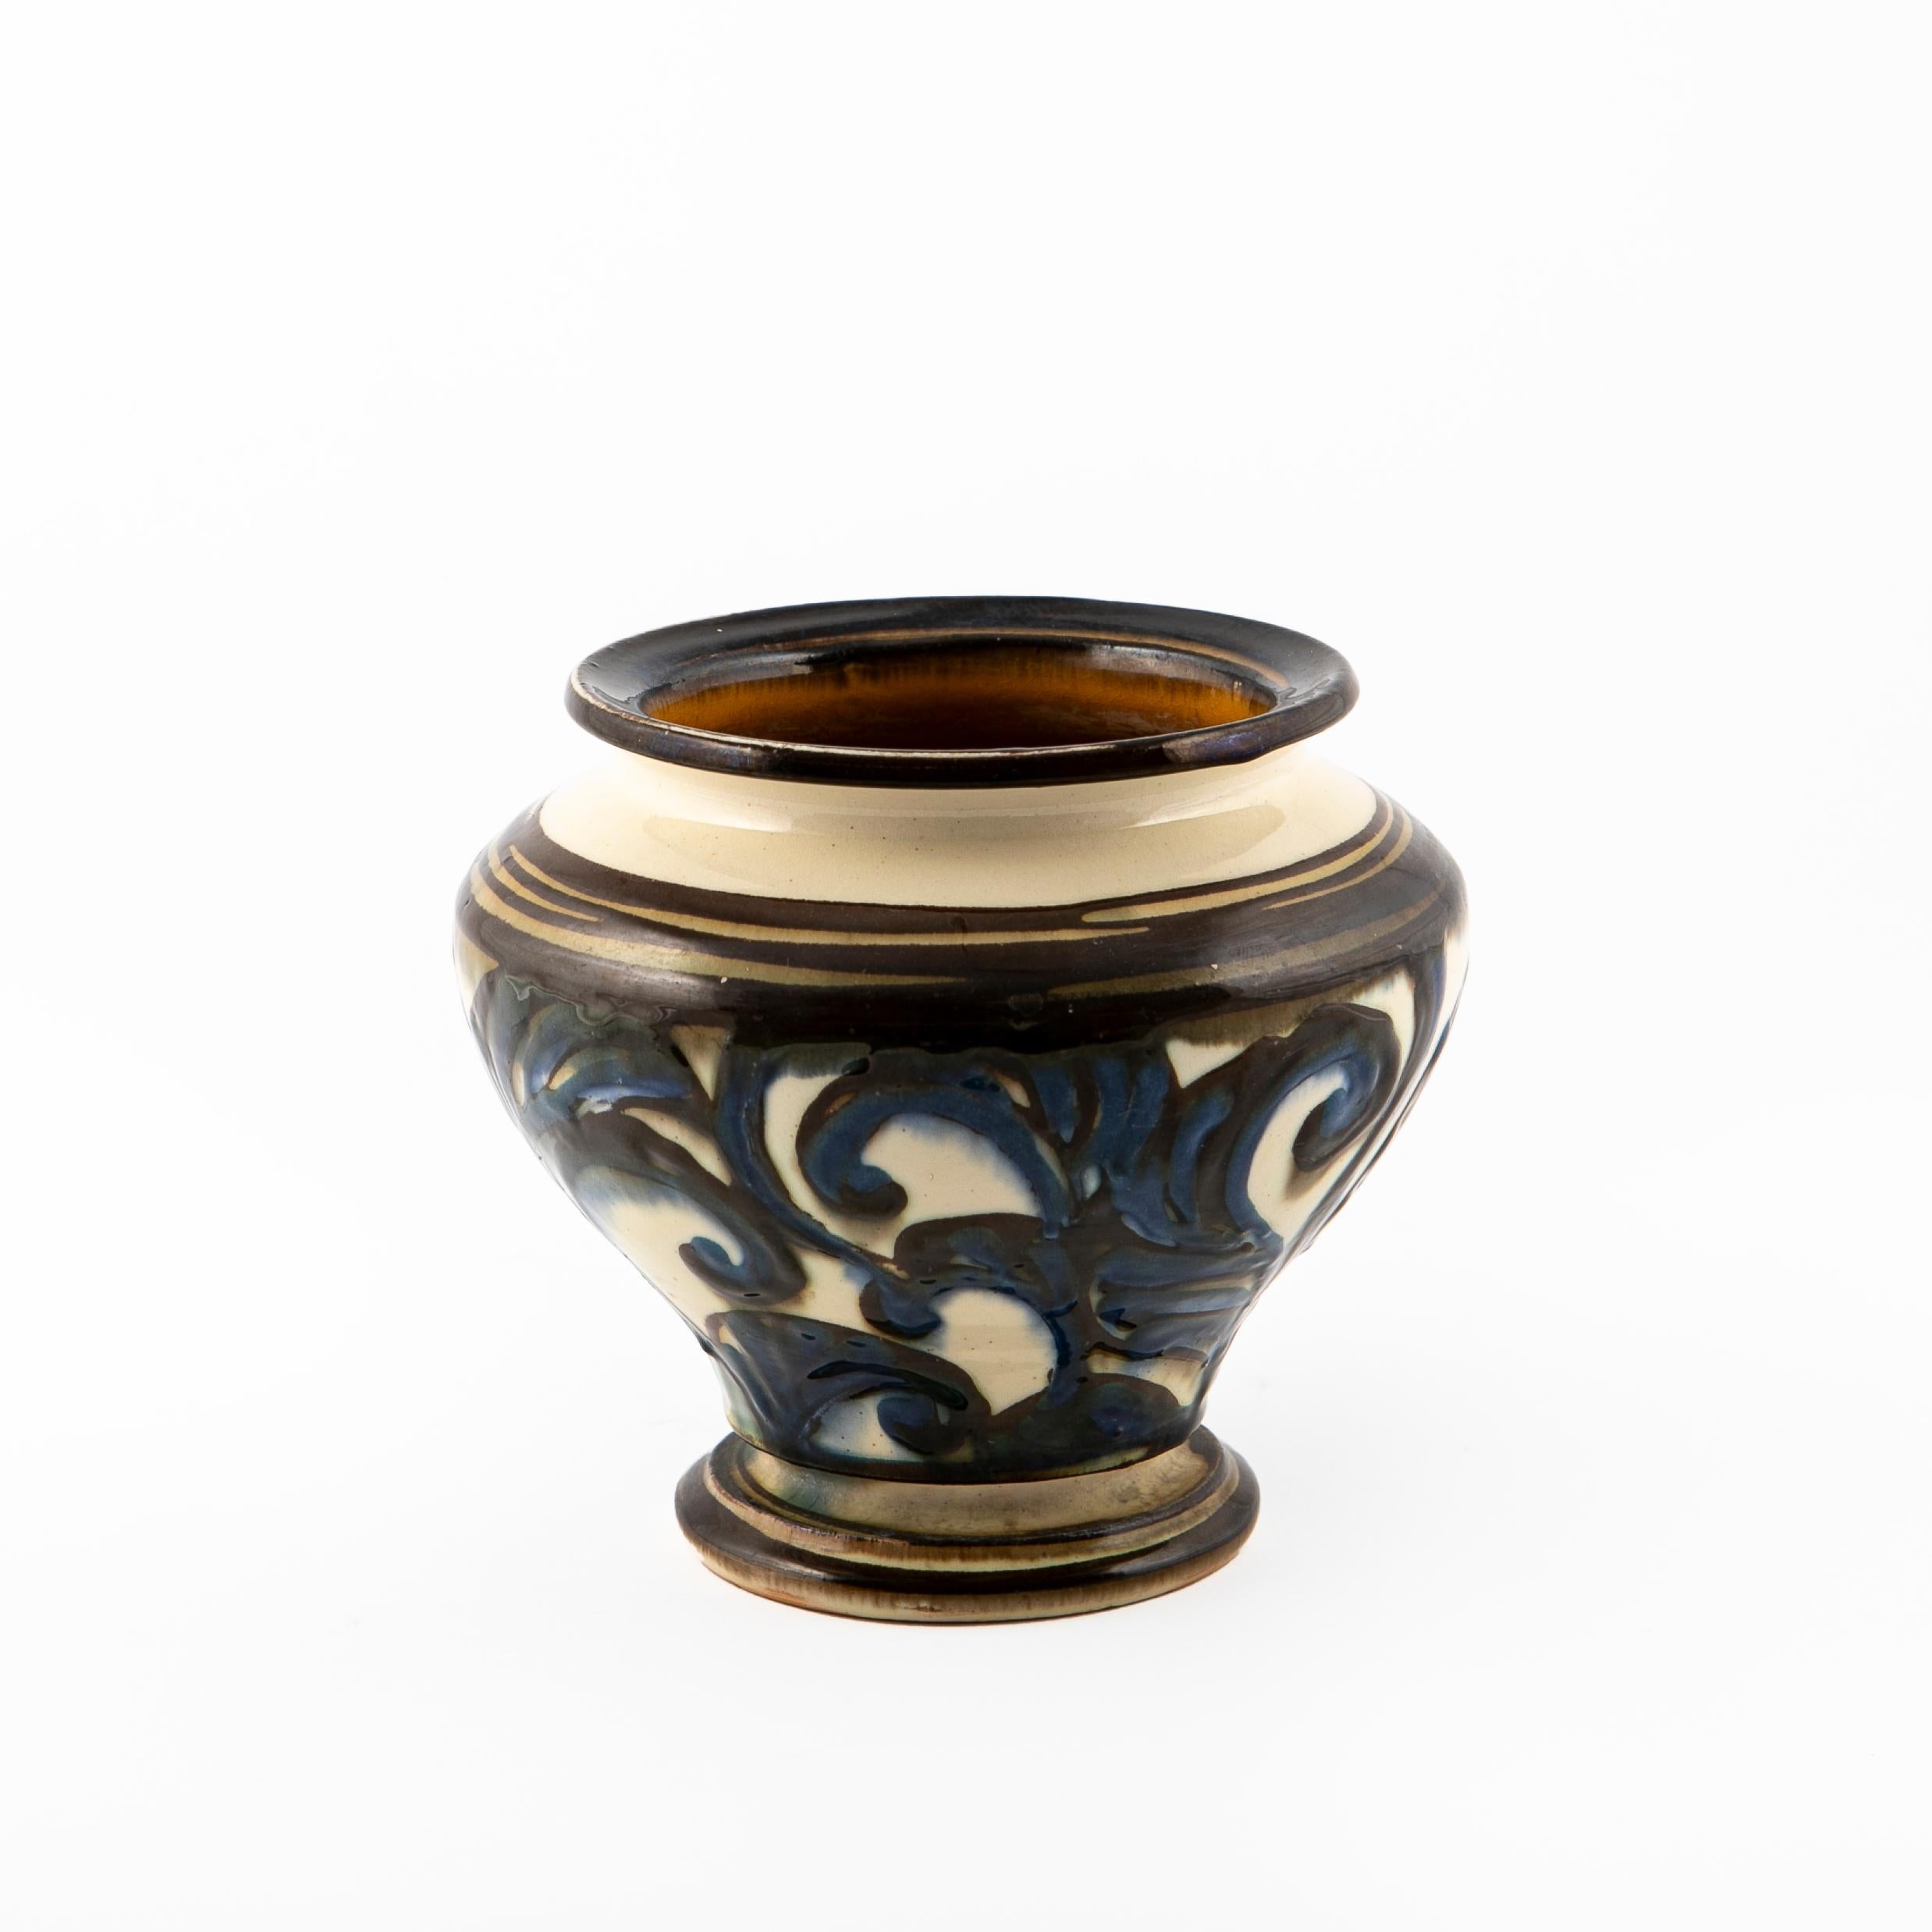 Small glazed ceramic vase with an abstract hand-decorated pattern.
Height: 15 cm.
Blue and brown shades on a bright cream white base. Inside of the vase in yellow ocher glaze.

The underside is signed with the well known logotype HAK.
Denmark 1930's
